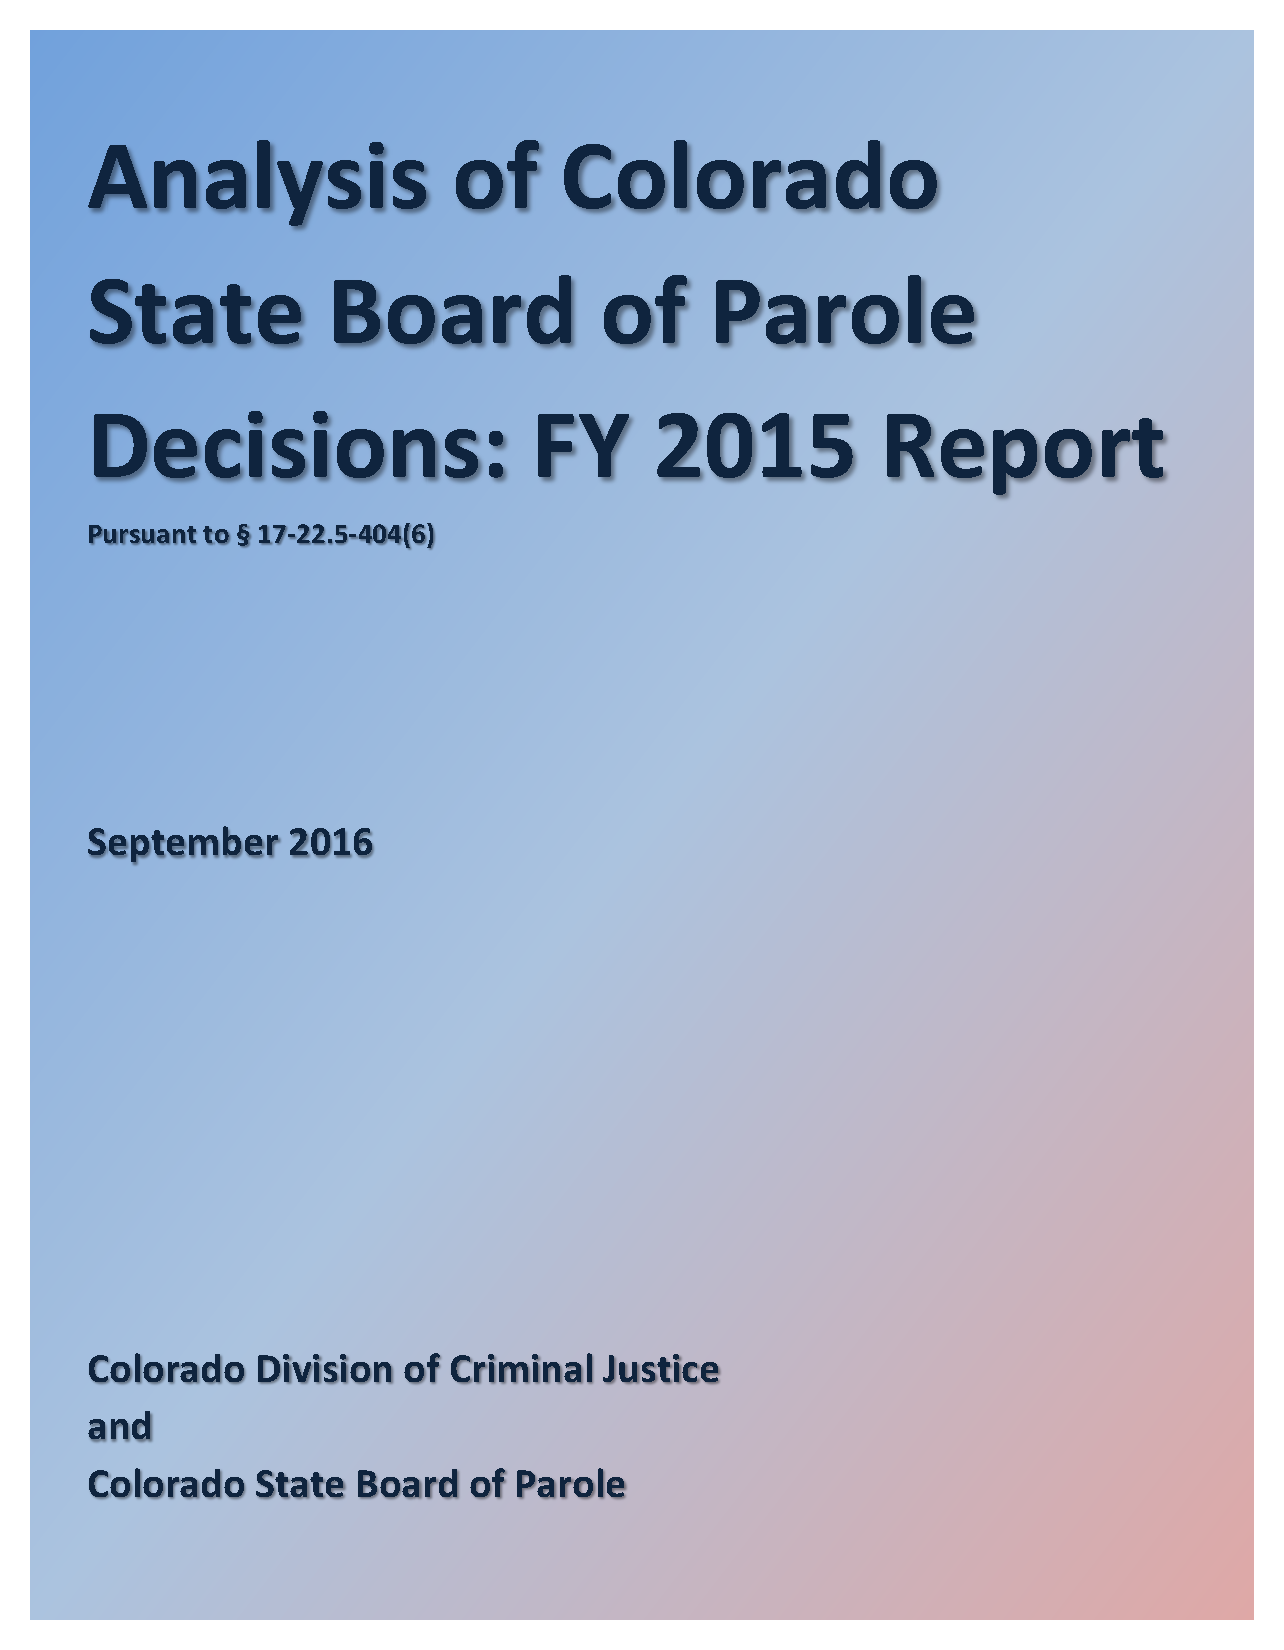 Analysis of Colorado State Board of Parole Decisions: FY 2015 Report (September 2016, revised)